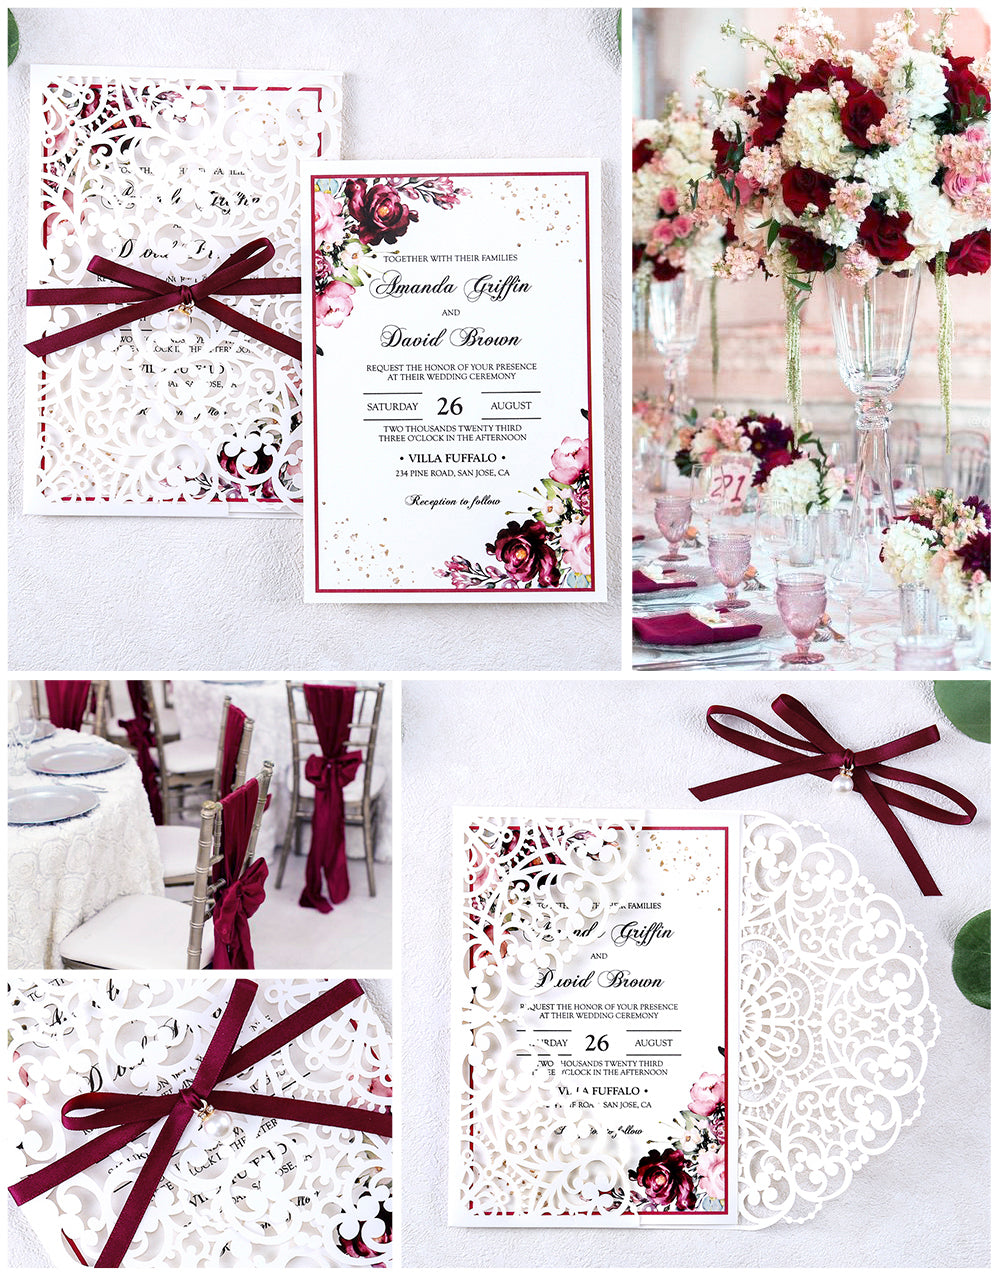 5 X 7.2" Laser Cut Hollow Rose Wedding invitations Cards With Burgundy Ribbon And Envelopes For Wedding Bridal Shower Engagement